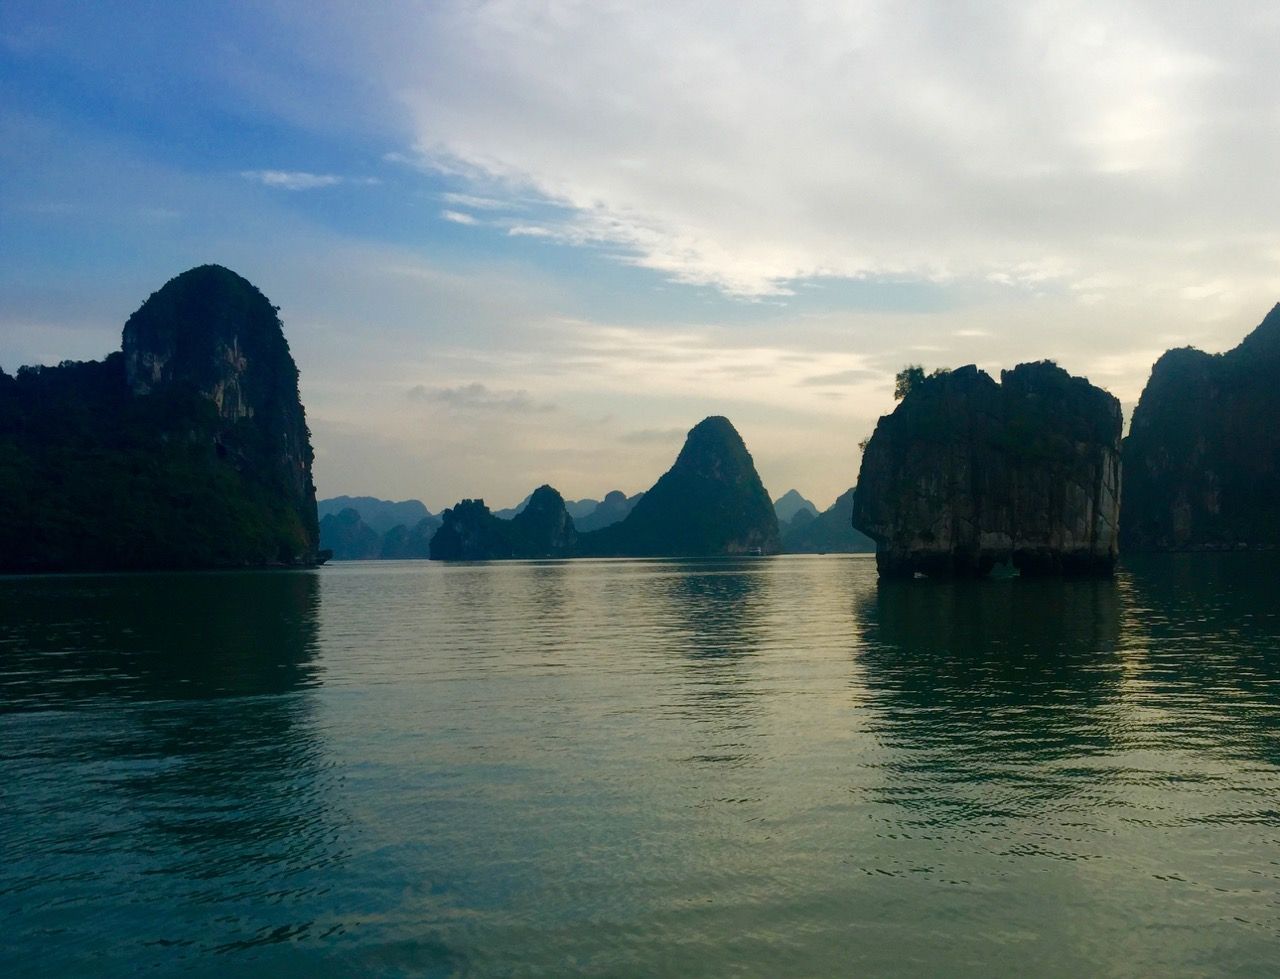 An island in Ha Long Bay recognizable because it is on the 200,000 VND bill.